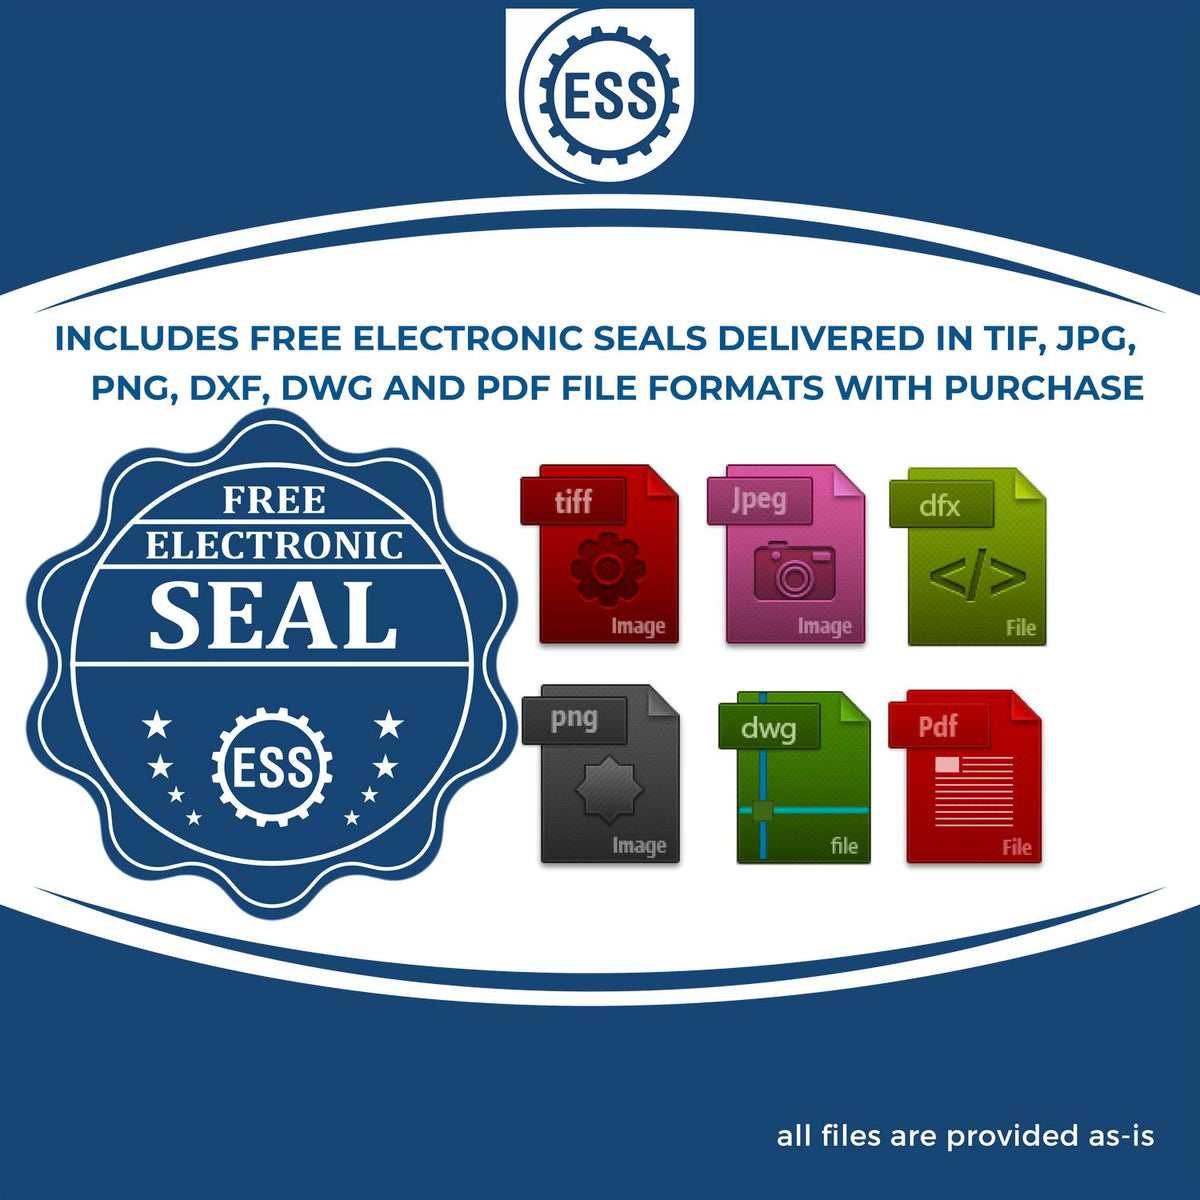 An infographic for the free electronic seal for the Heavy Duty Cast Iron Vermont Architect Embosser illustrating the different file type icons such as DXF, DWG, TIF, JPG and PNG.